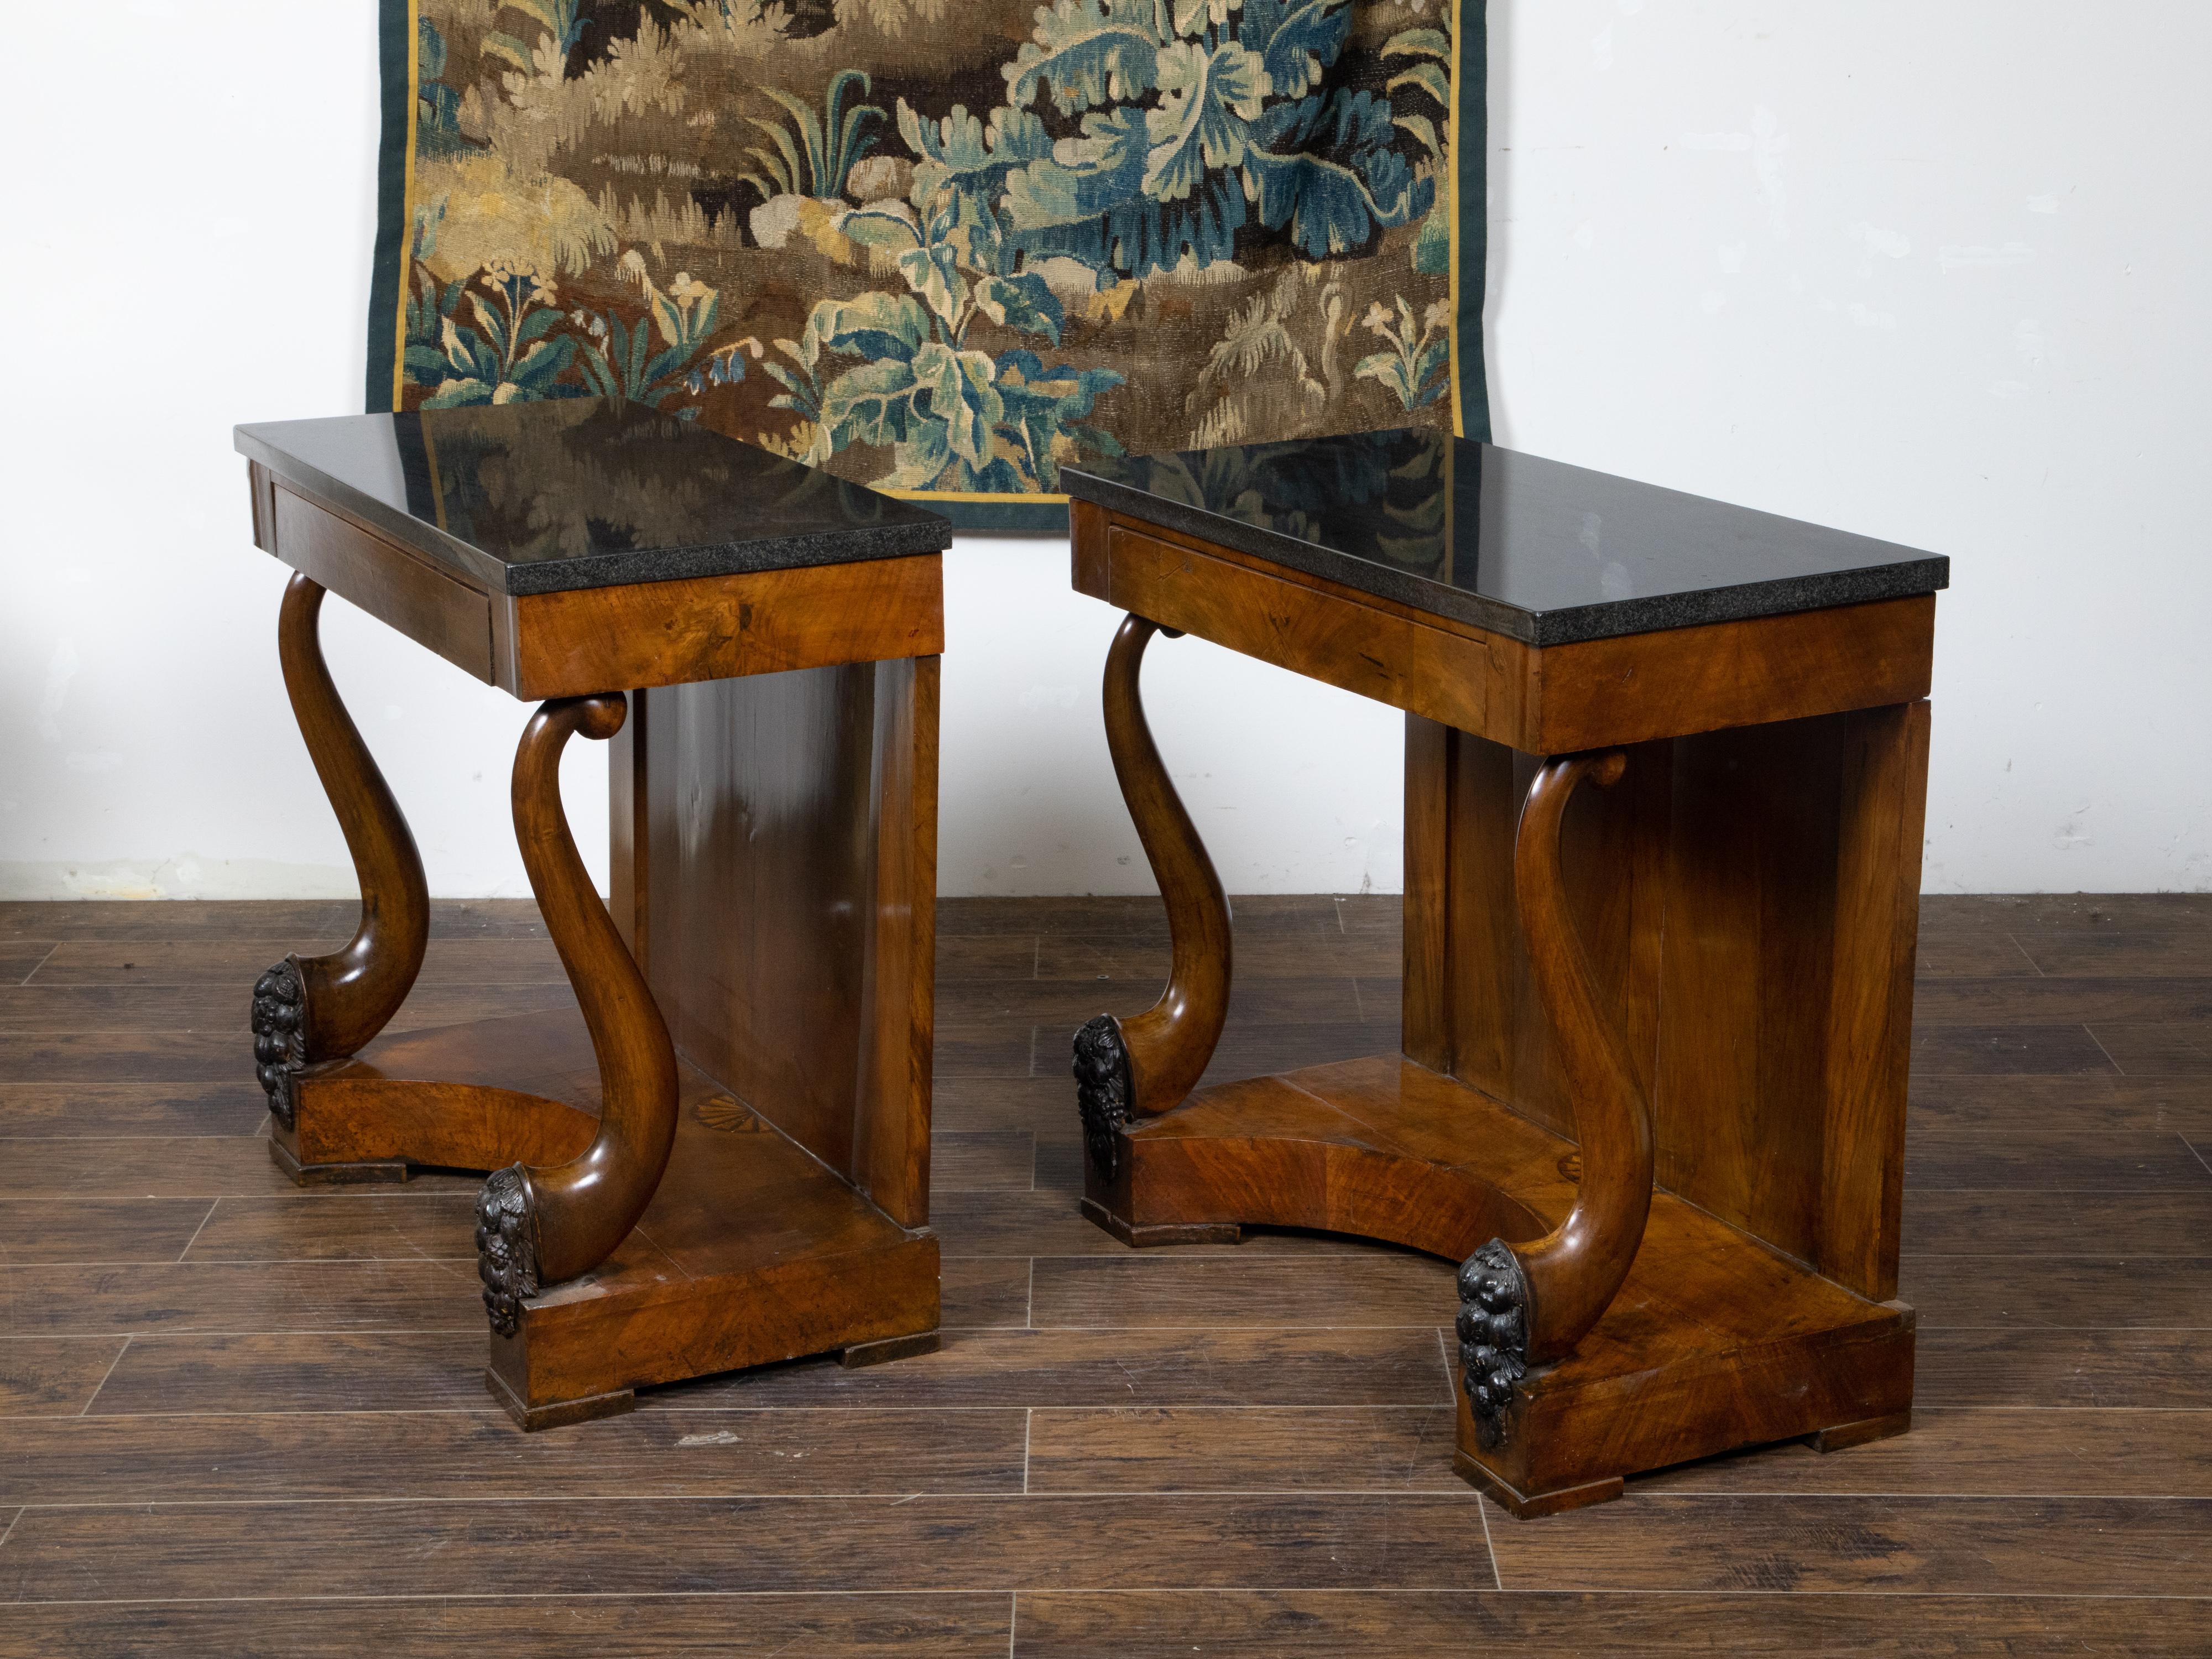 A pair of Austrian Biedermeier period walnut console tables from the 19th century, with black marble tops, scrolling voluted leg supports, ebonized carved accents with grapes and inlaid fan motif. Created in Austria during the Biedermeier period,